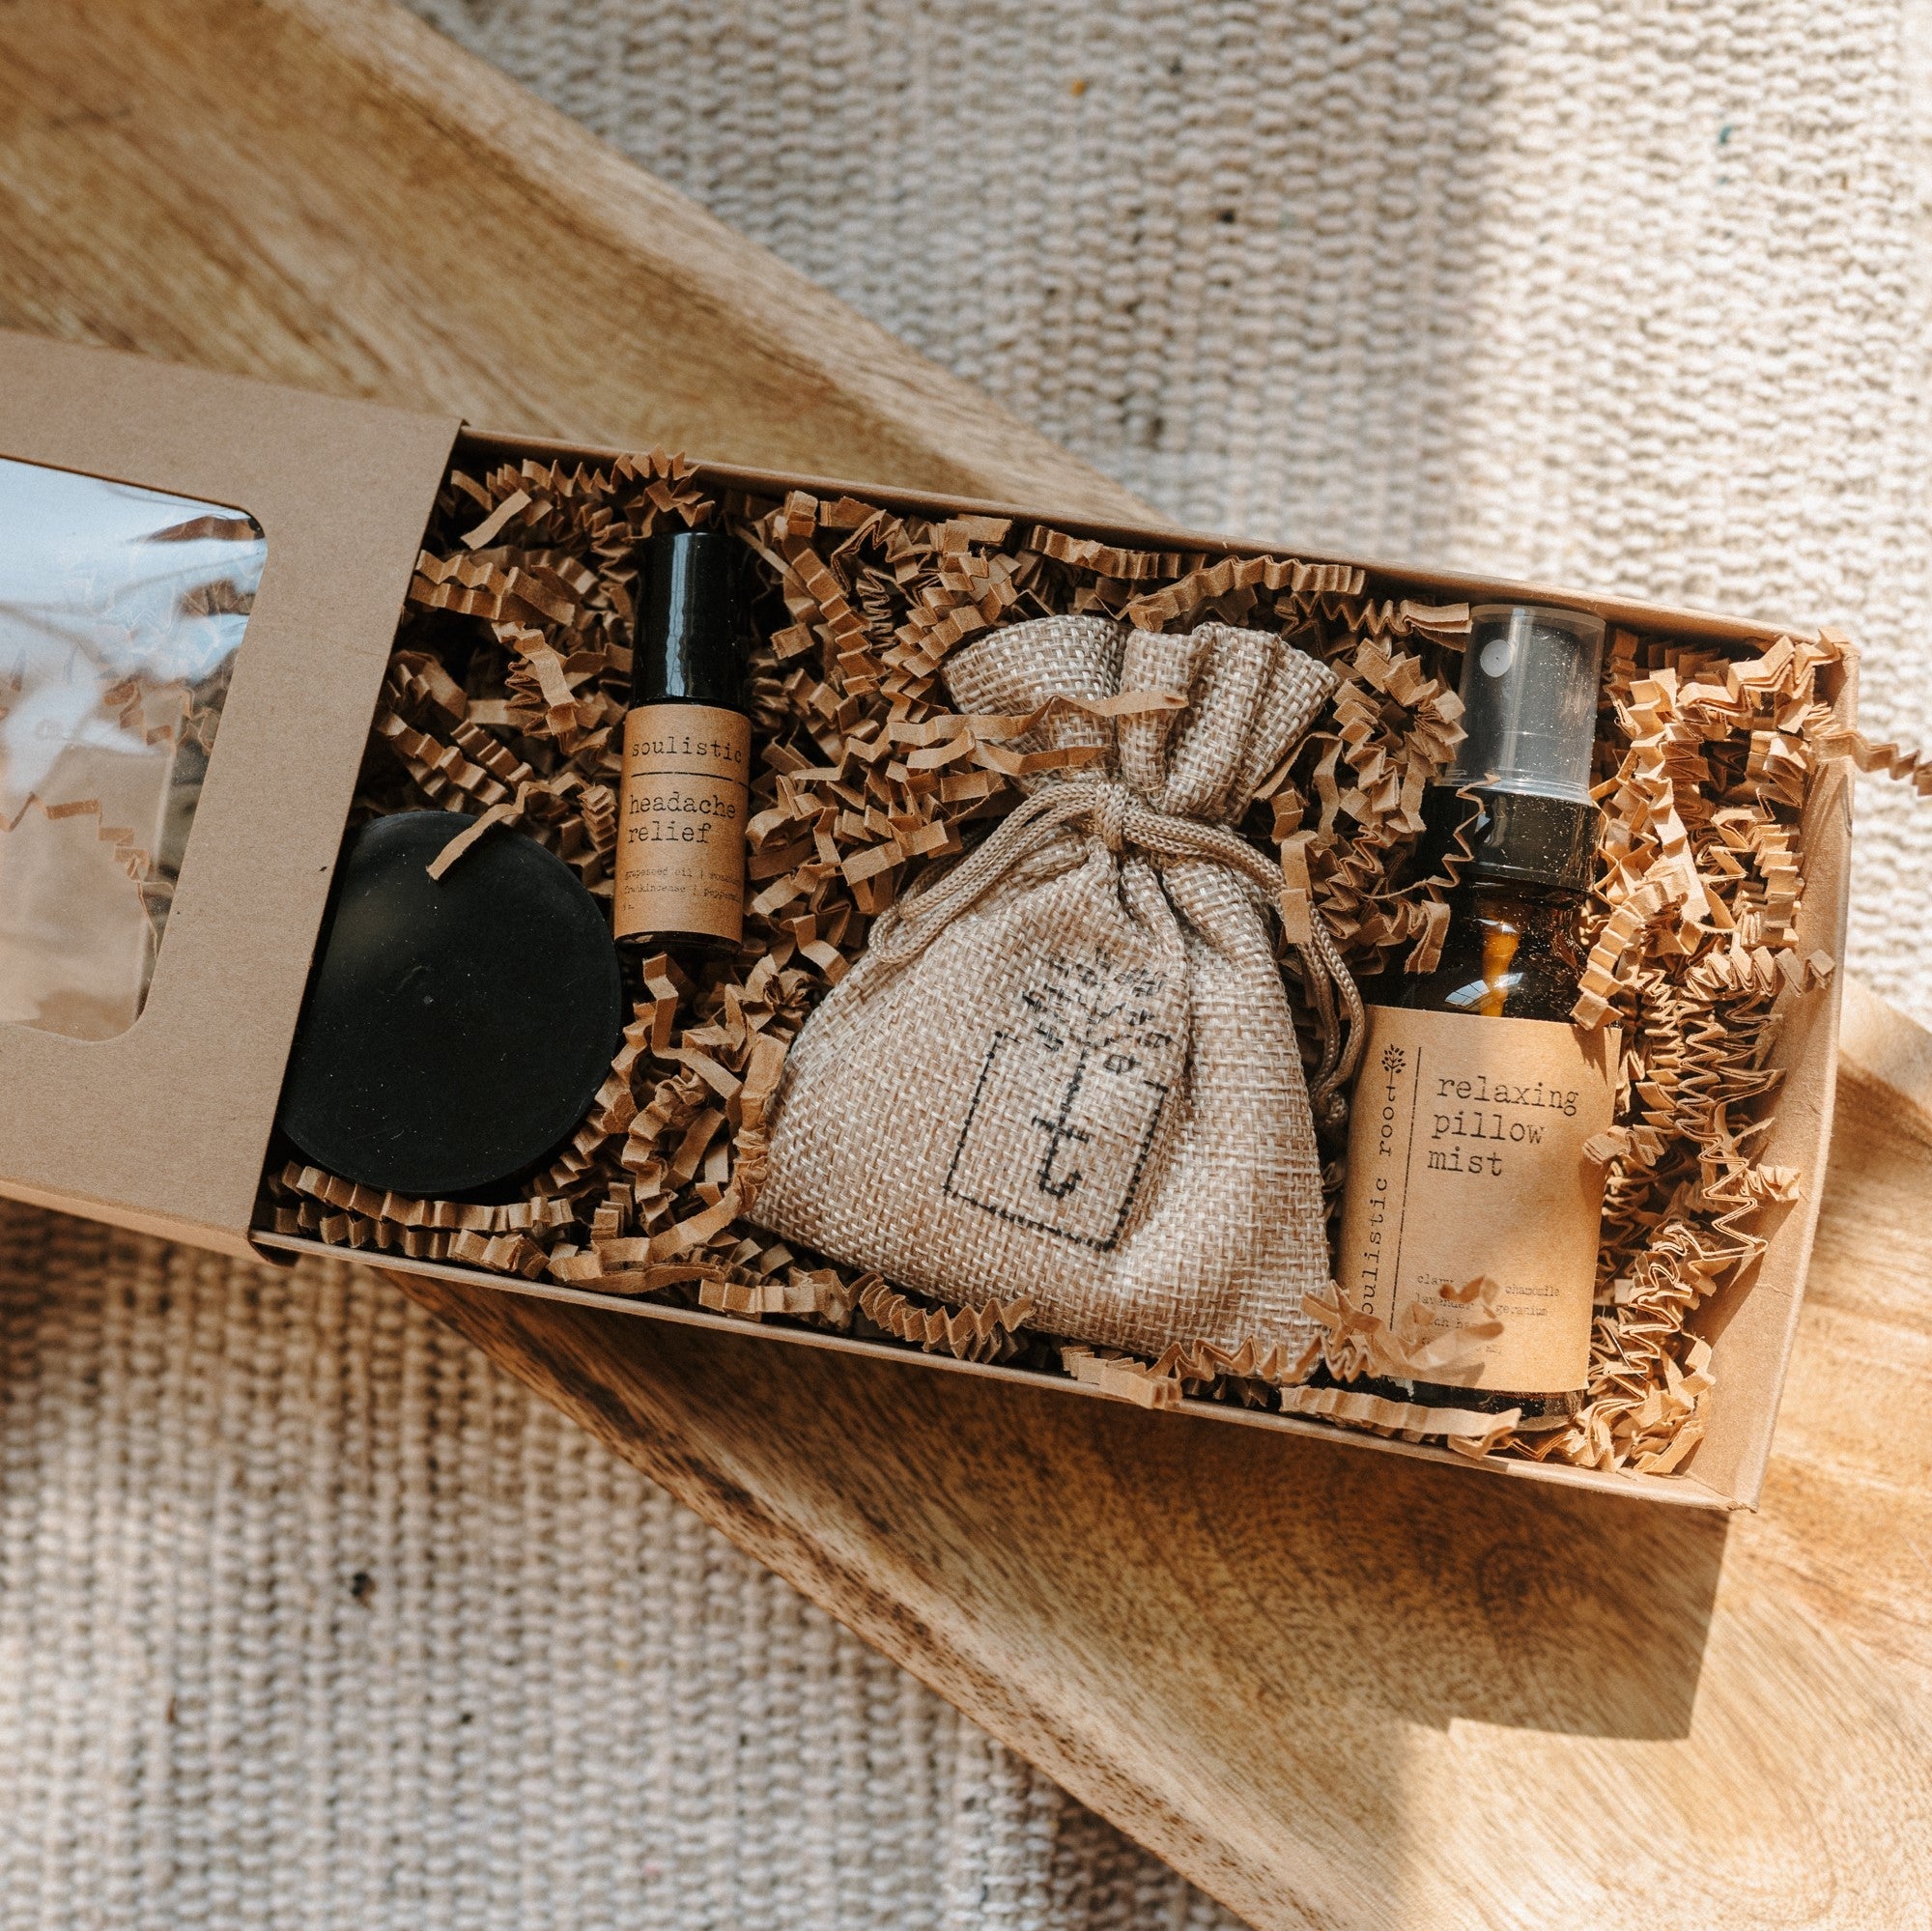 A travel set full of sample sizes already wrapped in a kraft box. The set includes a lavender & chamomile epsom salt bath, essential oil headache relief roller, organic herbal oatmeal bath soak & a relaxing pillow spray. The set is on a piece of wood and blanket in the background.